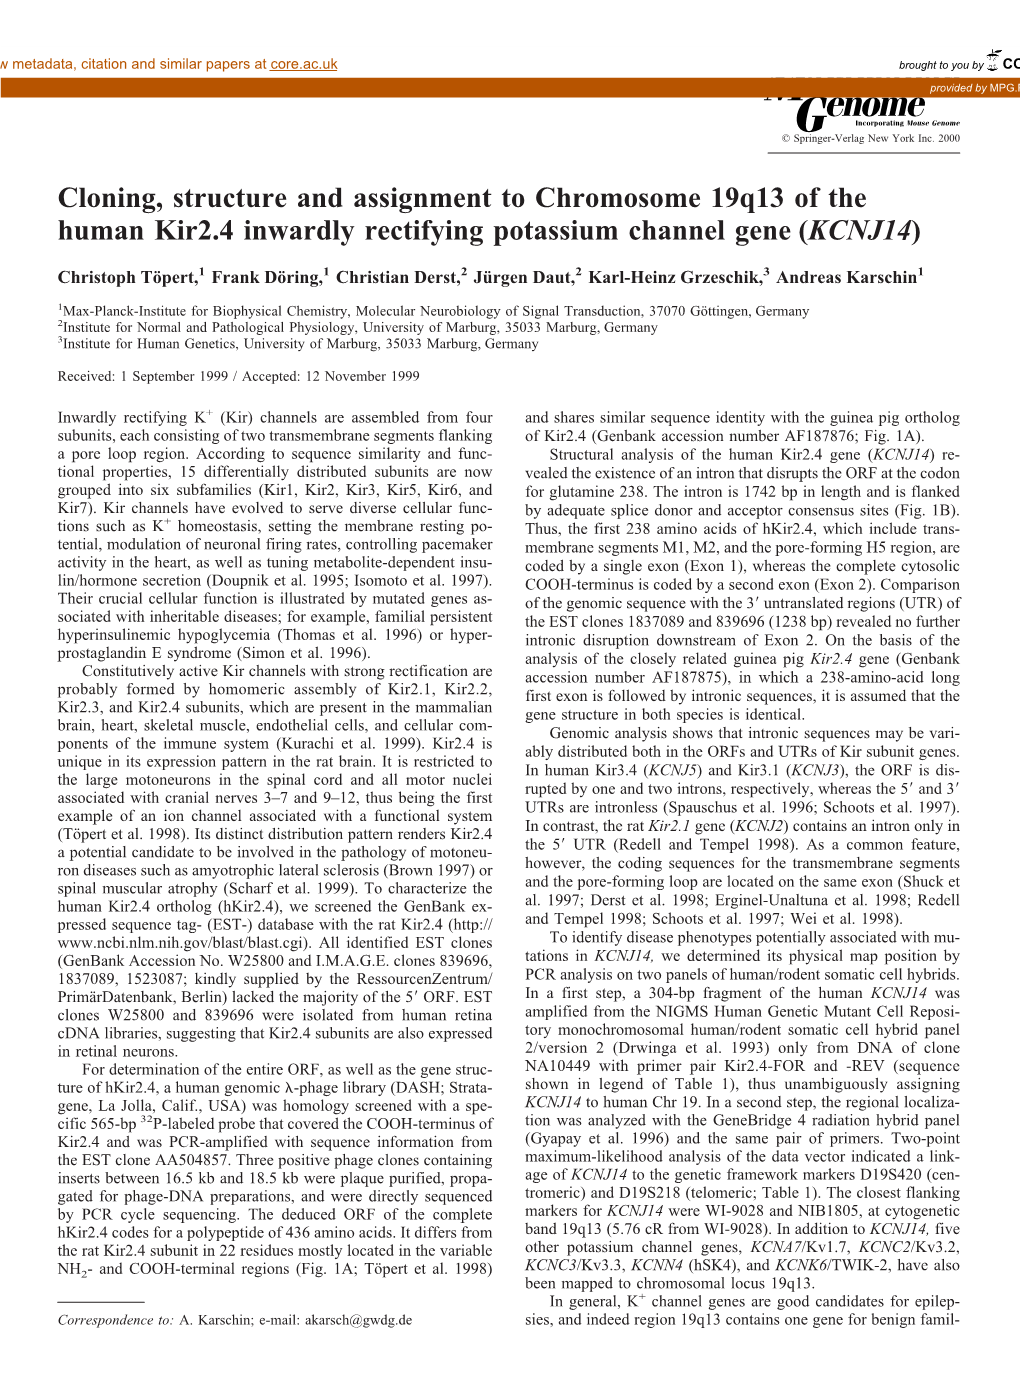 Cloning, Structure and Assignment to Chromosome 19Q13 of the Human Kir2.4 Inwardly Rectifying Potassium Channel Gene (KCNJ14)